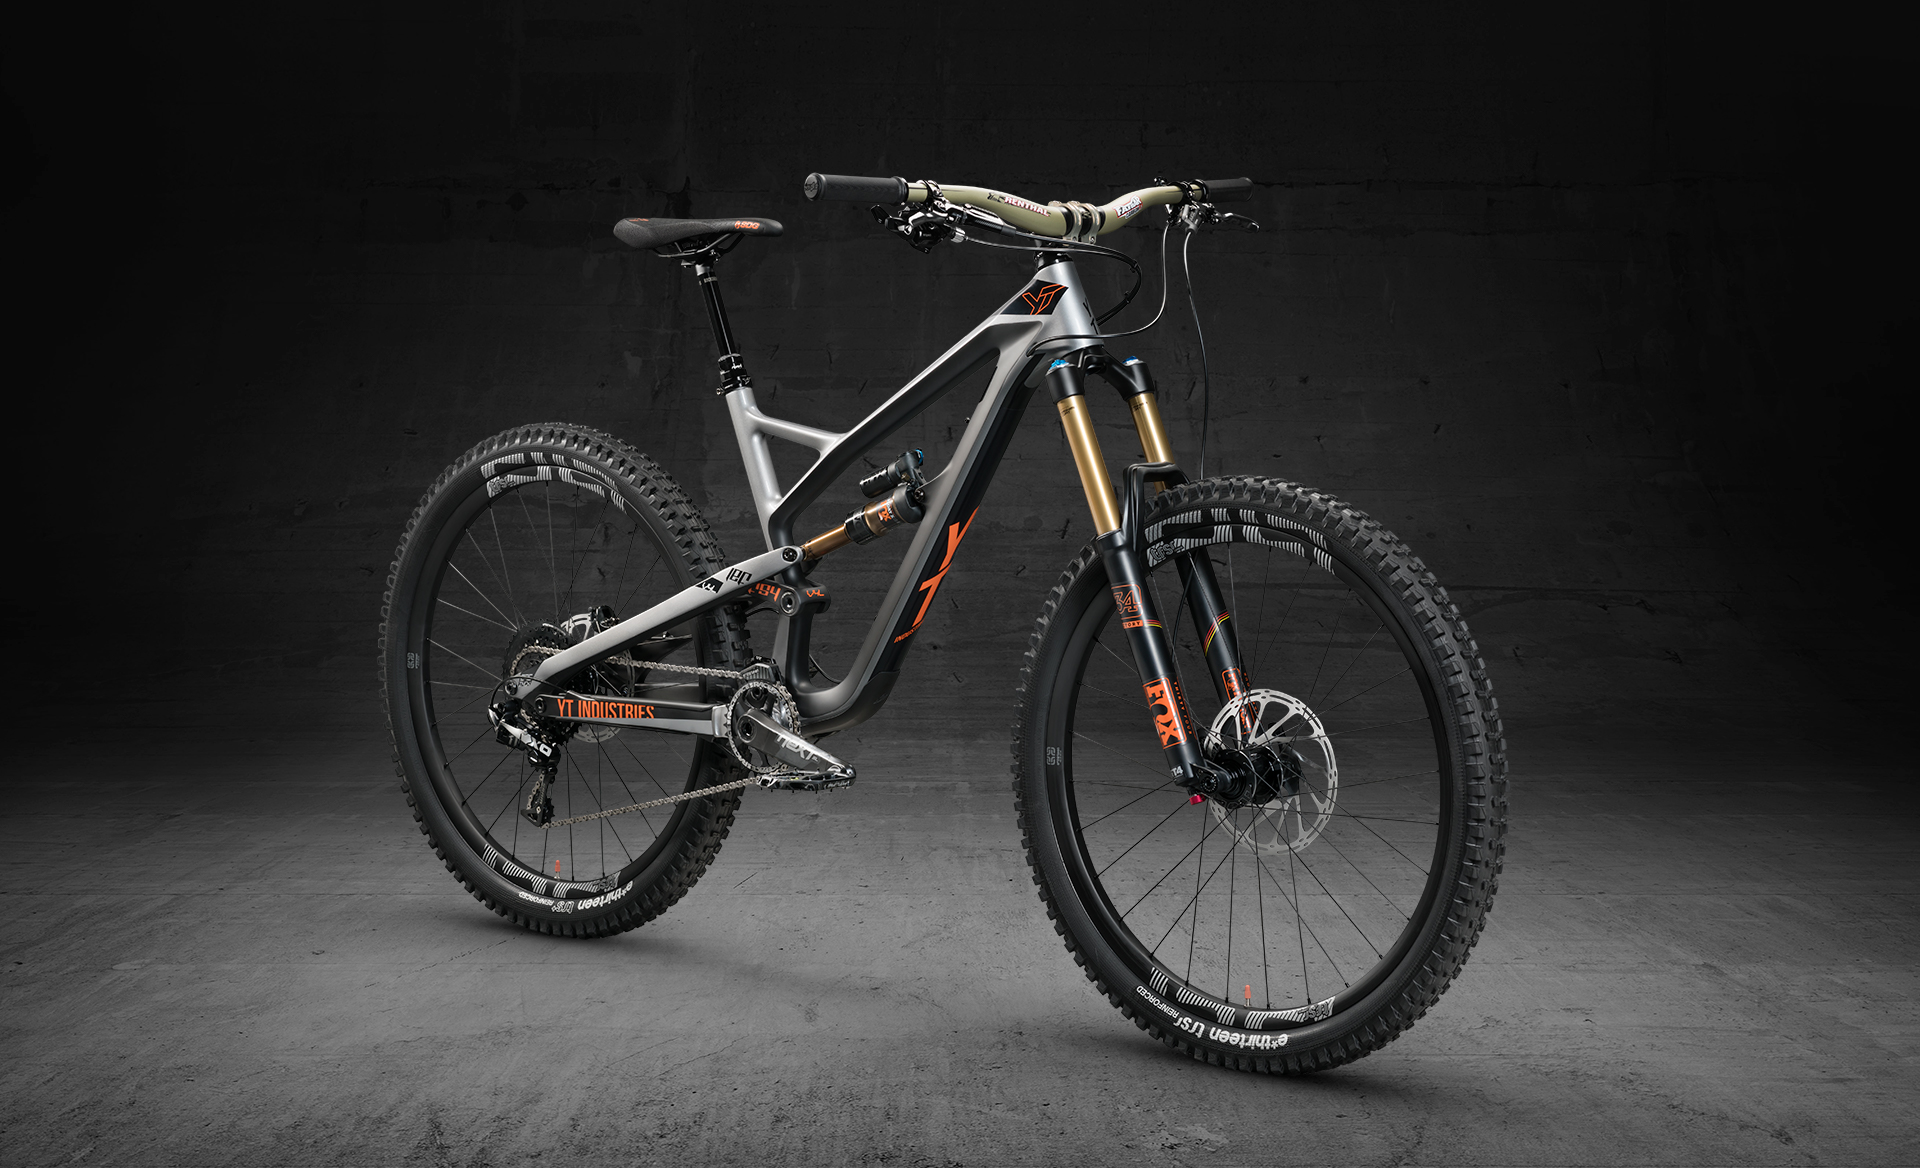 Jeffsy CF Pro Race - the only model in the range with 160mm of travel $7,999 NZD